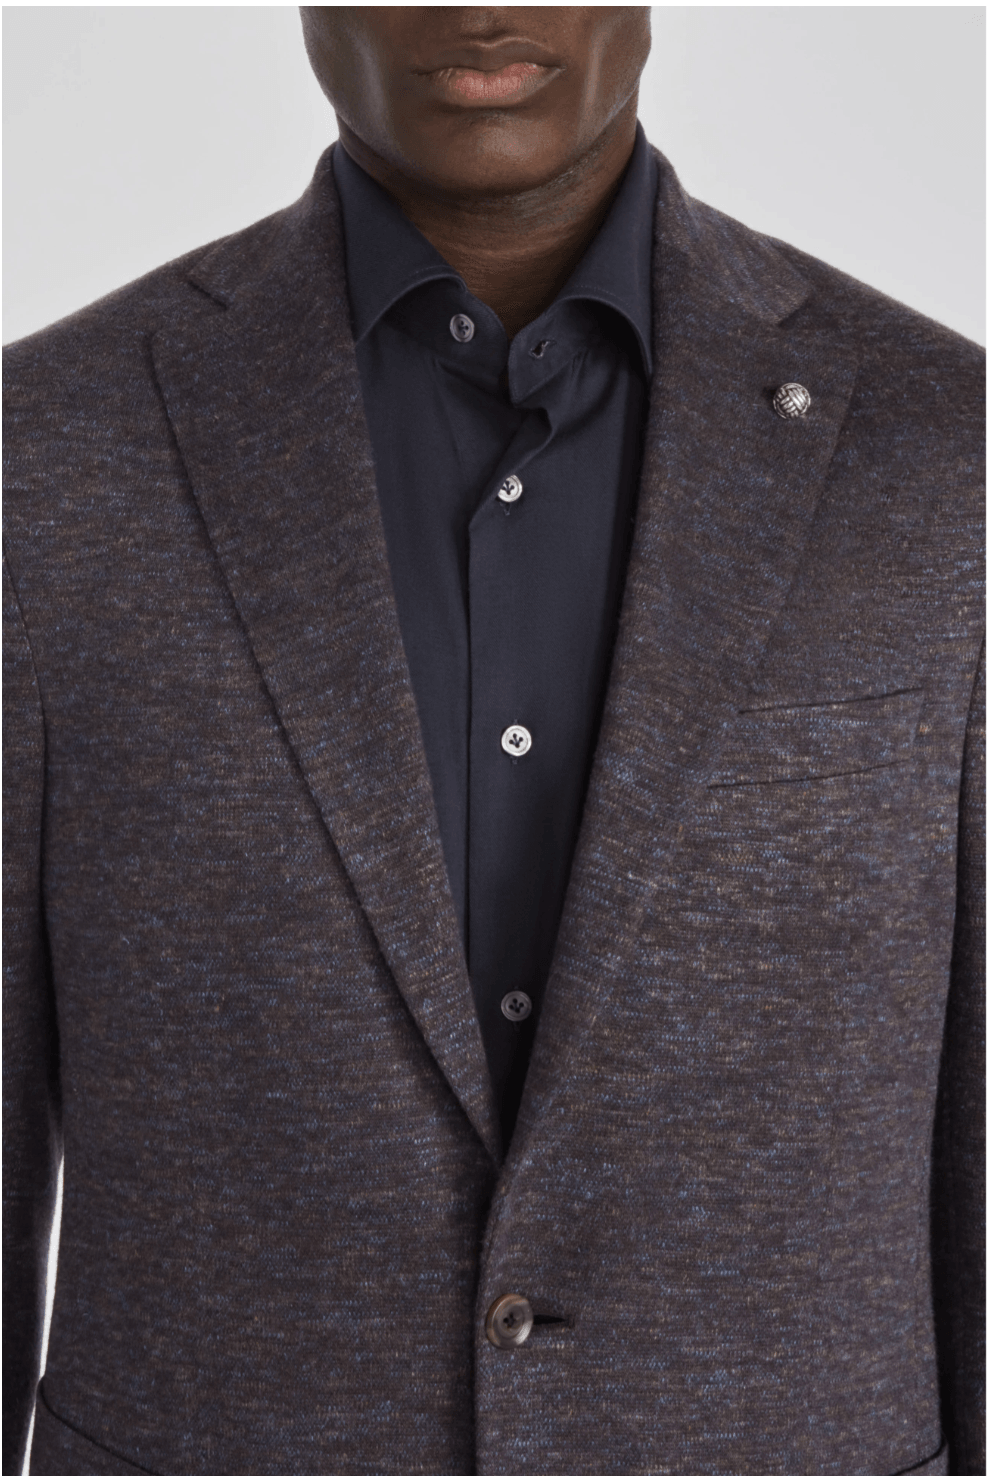 ⚡️Buy Giles & Jasper Ultra Motion Suit at Briggs Clothiers